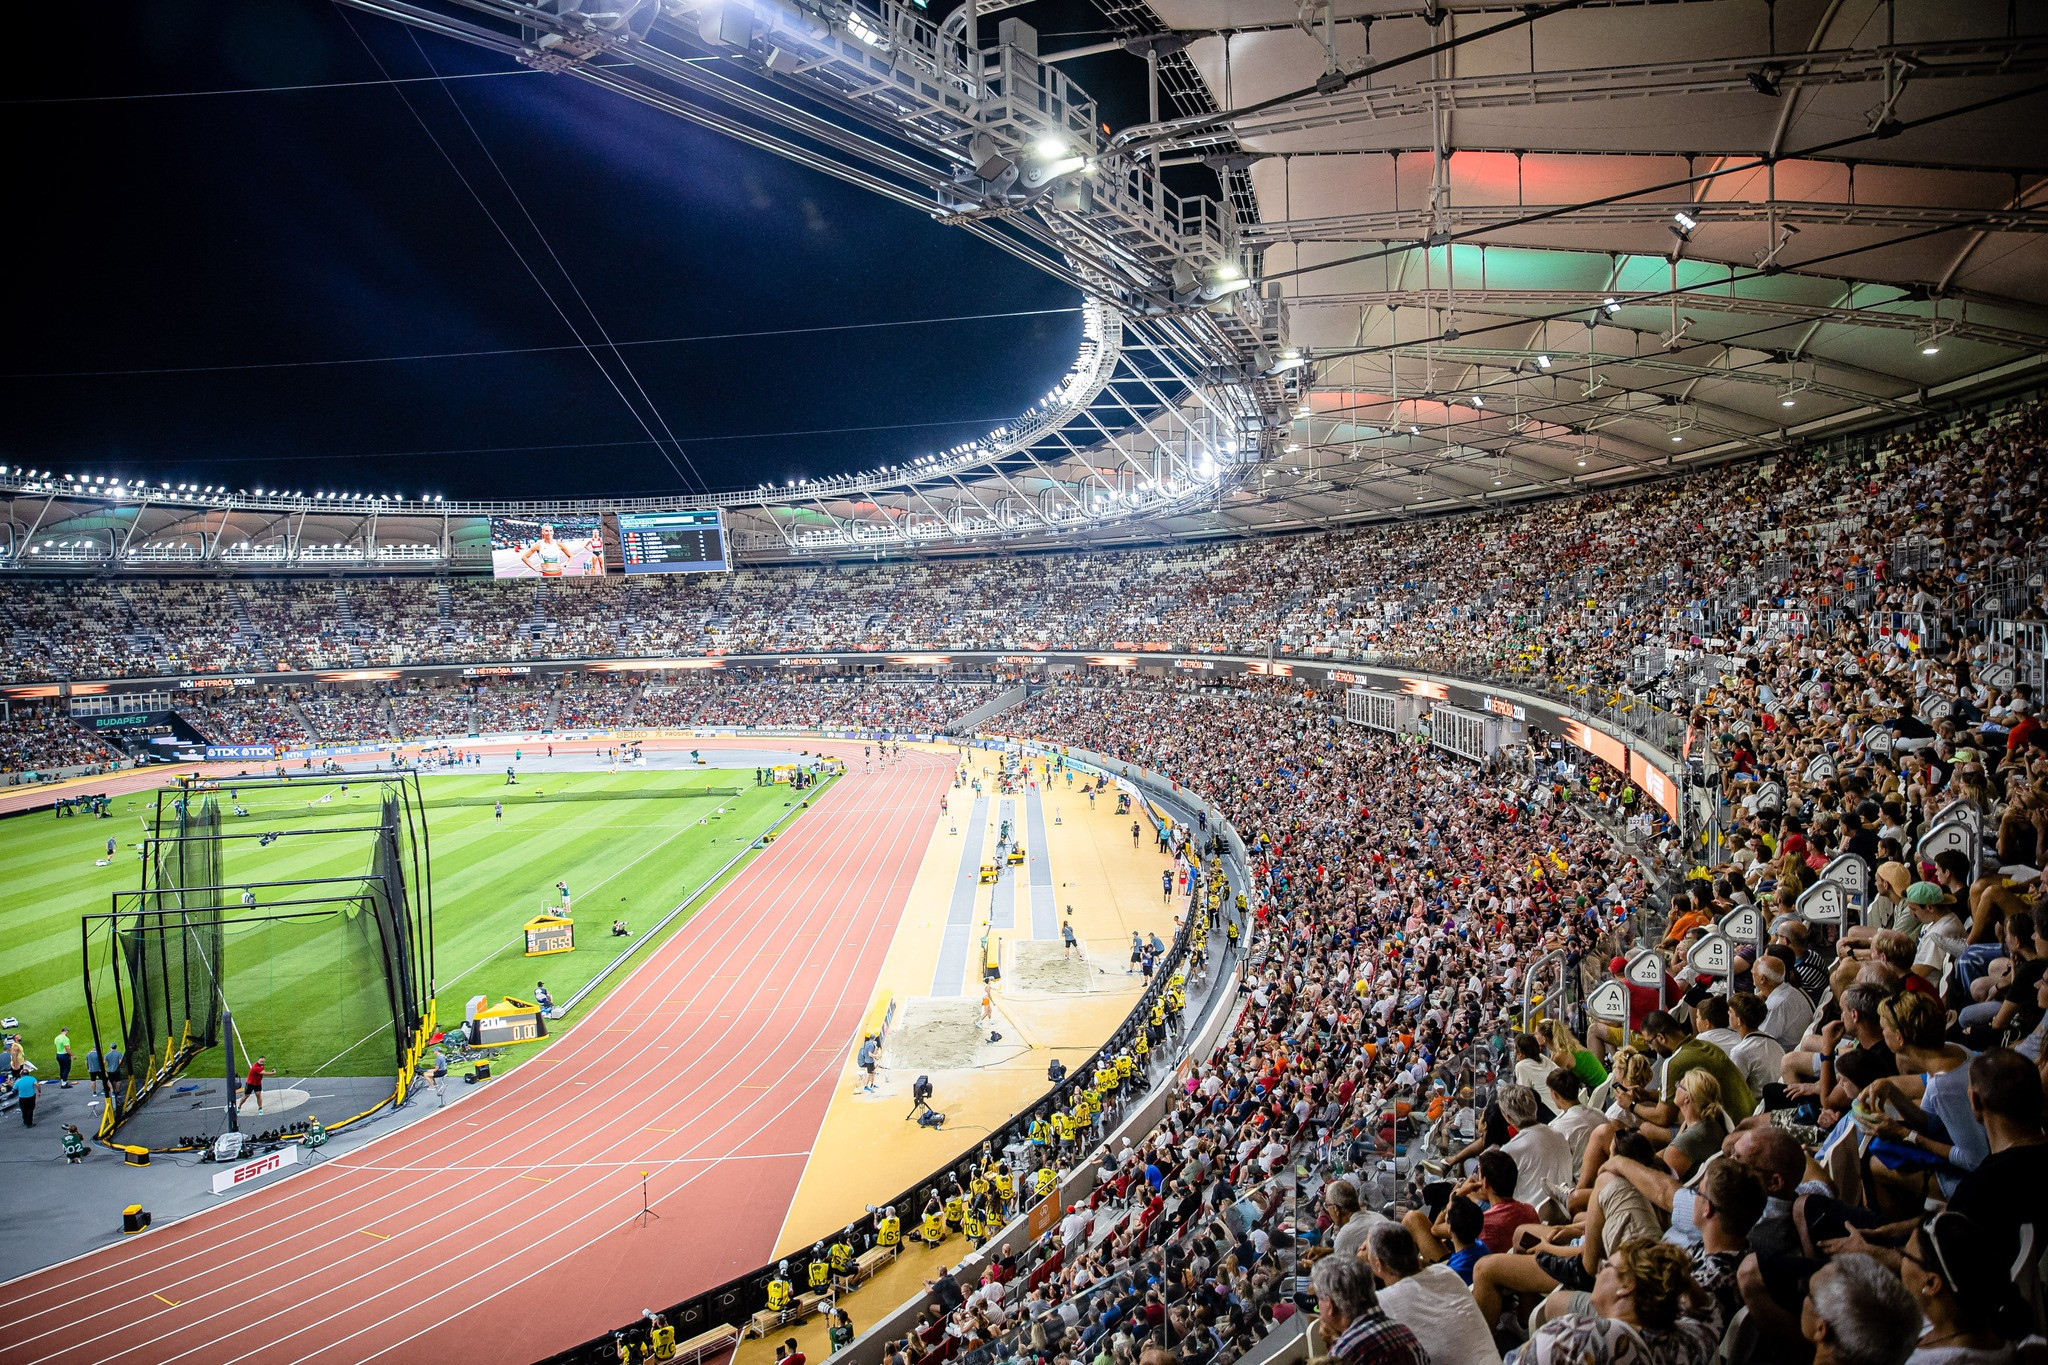 Exclusive: Spectators rate World Athletics Championships in Budapest highly in Nielsen survey